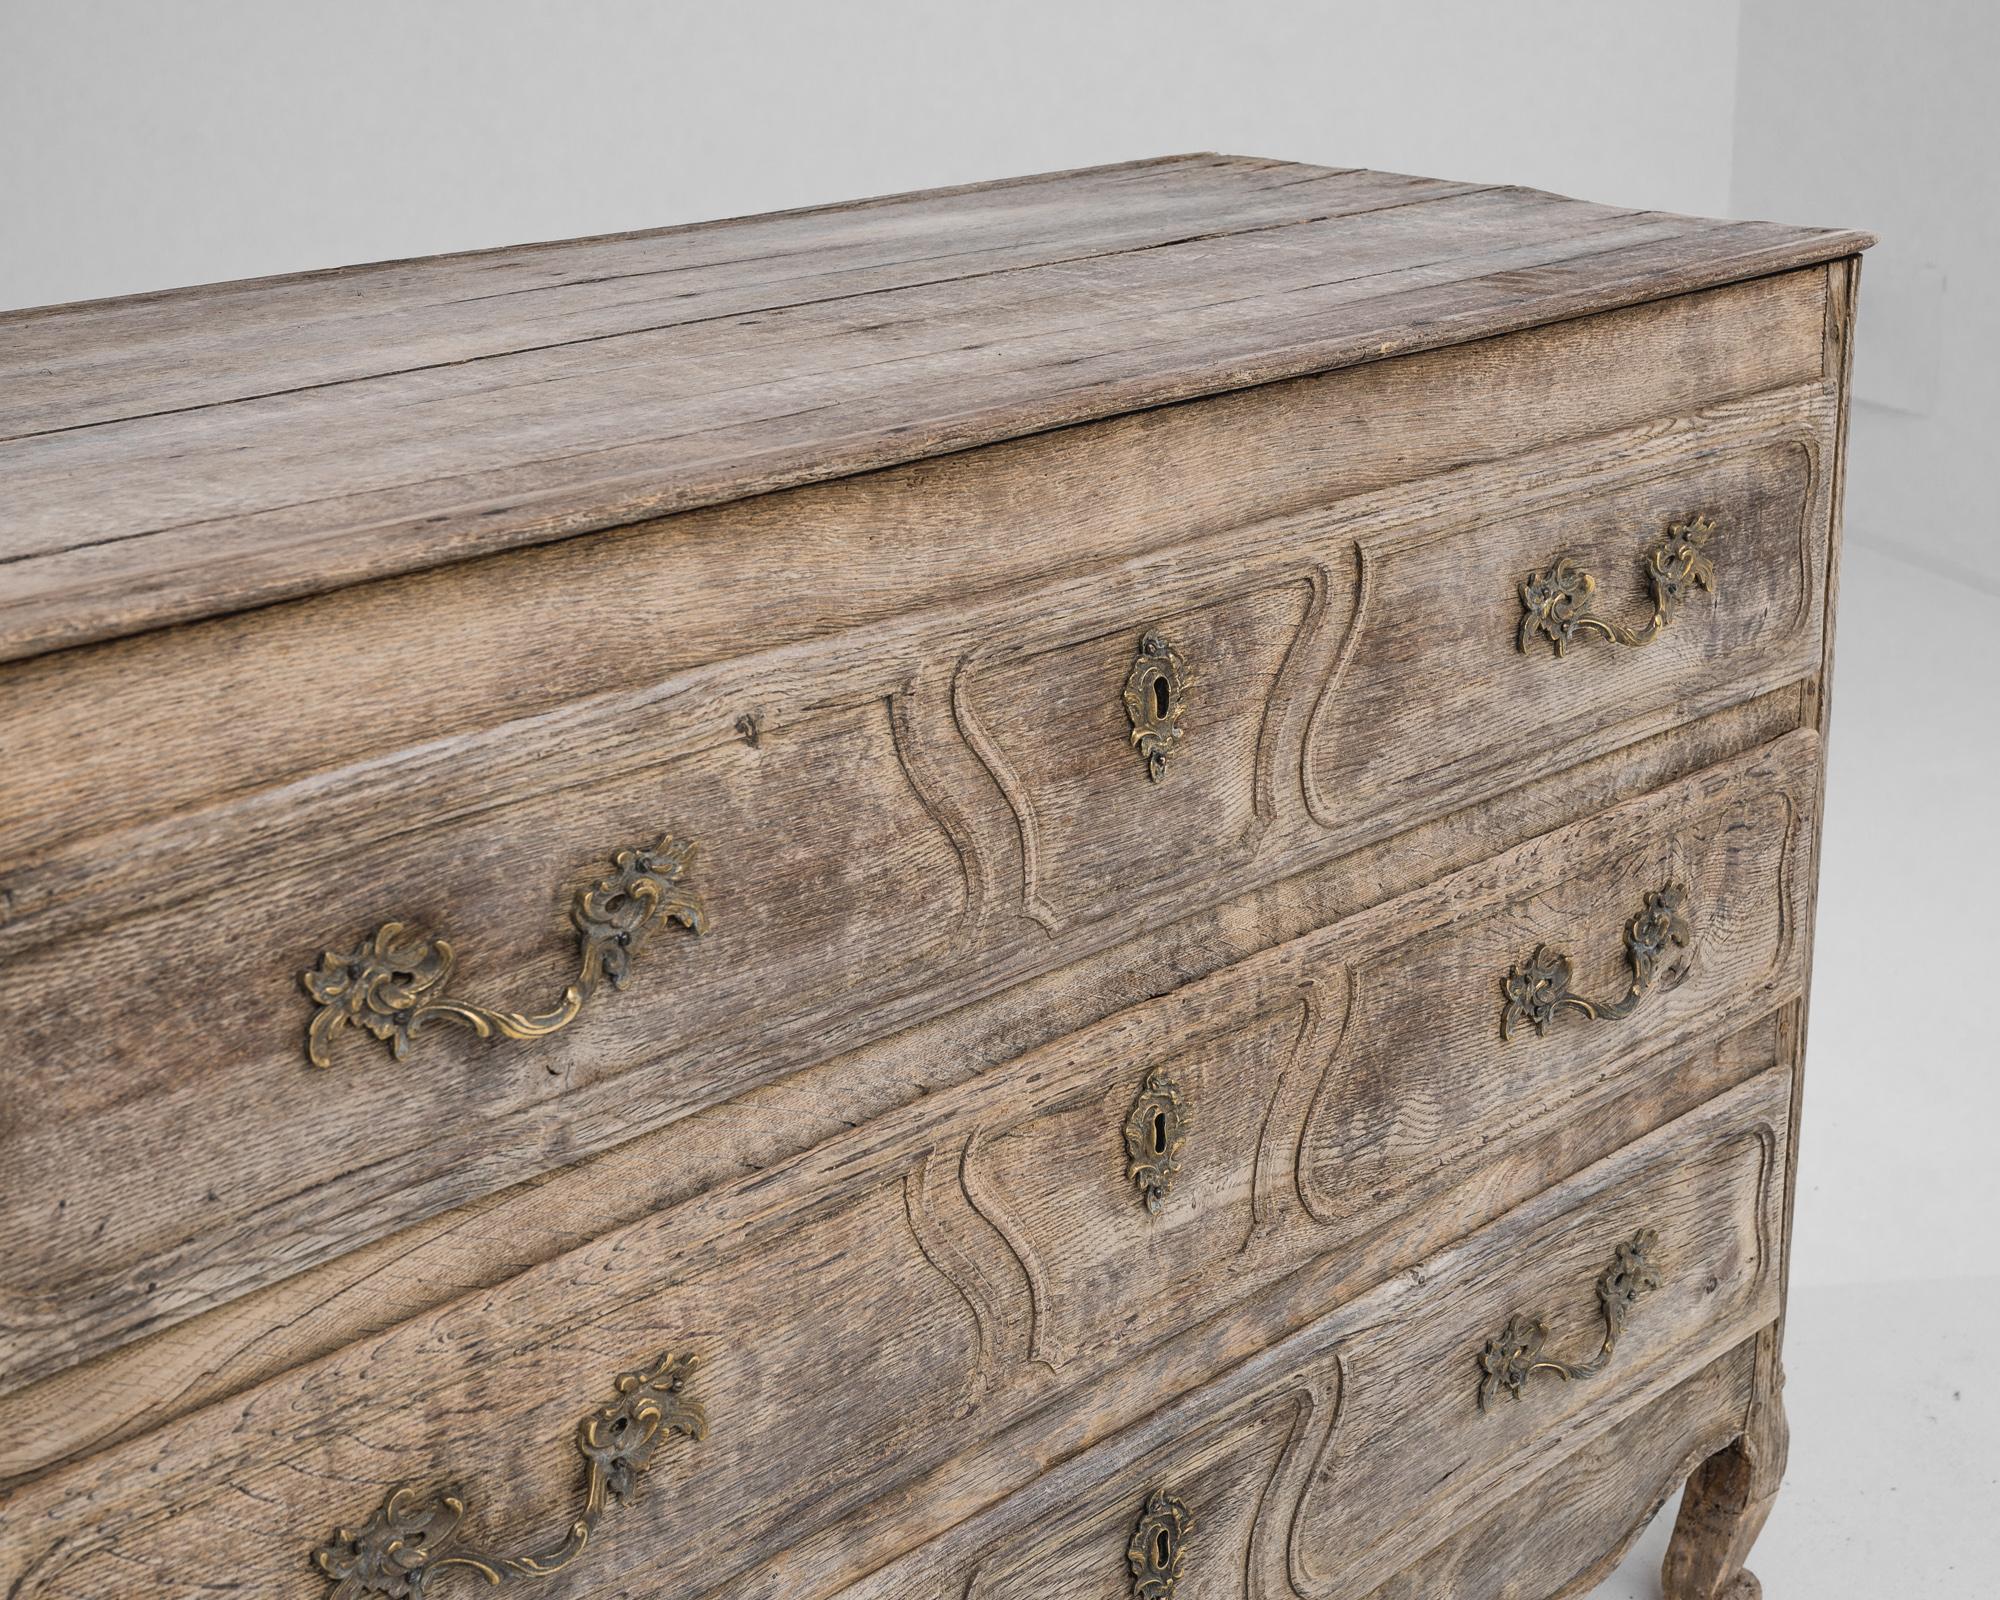 An antique chest of drawers produced in France, circa 1800. This bleached oak buffet displays three broad sliding drawers ornamented with engraved patterns, a scalloped apron and two front cabriole feet. The elaborate pulls and escutcheons made of